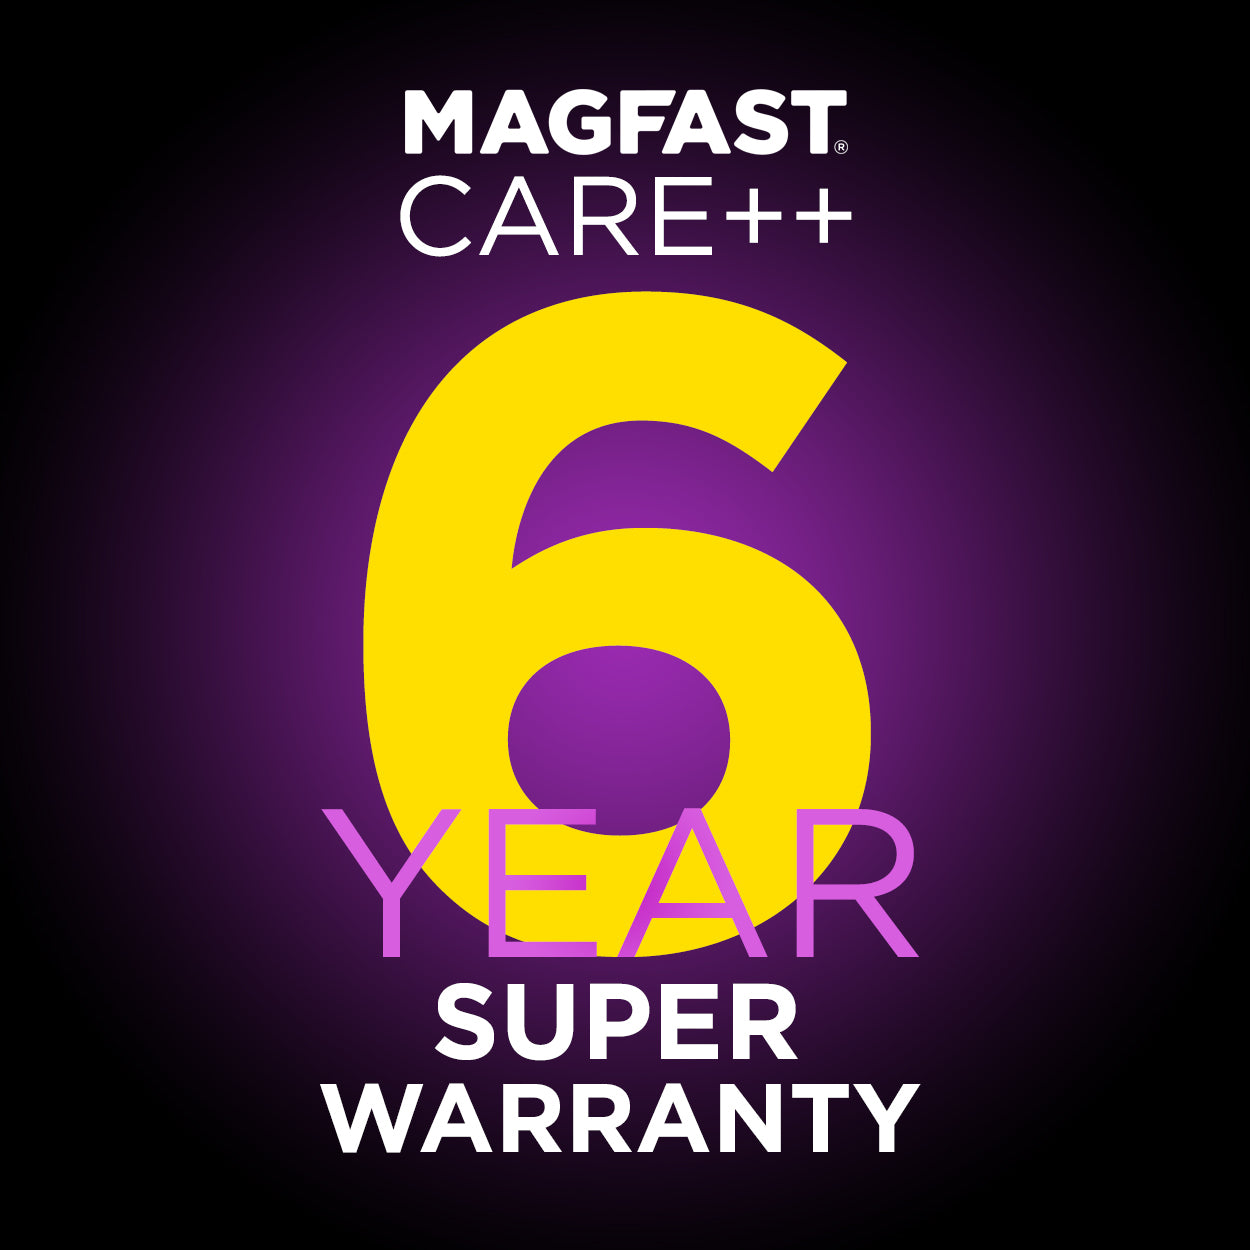 MAGFAST Care++ 6 Year Extended Warranty